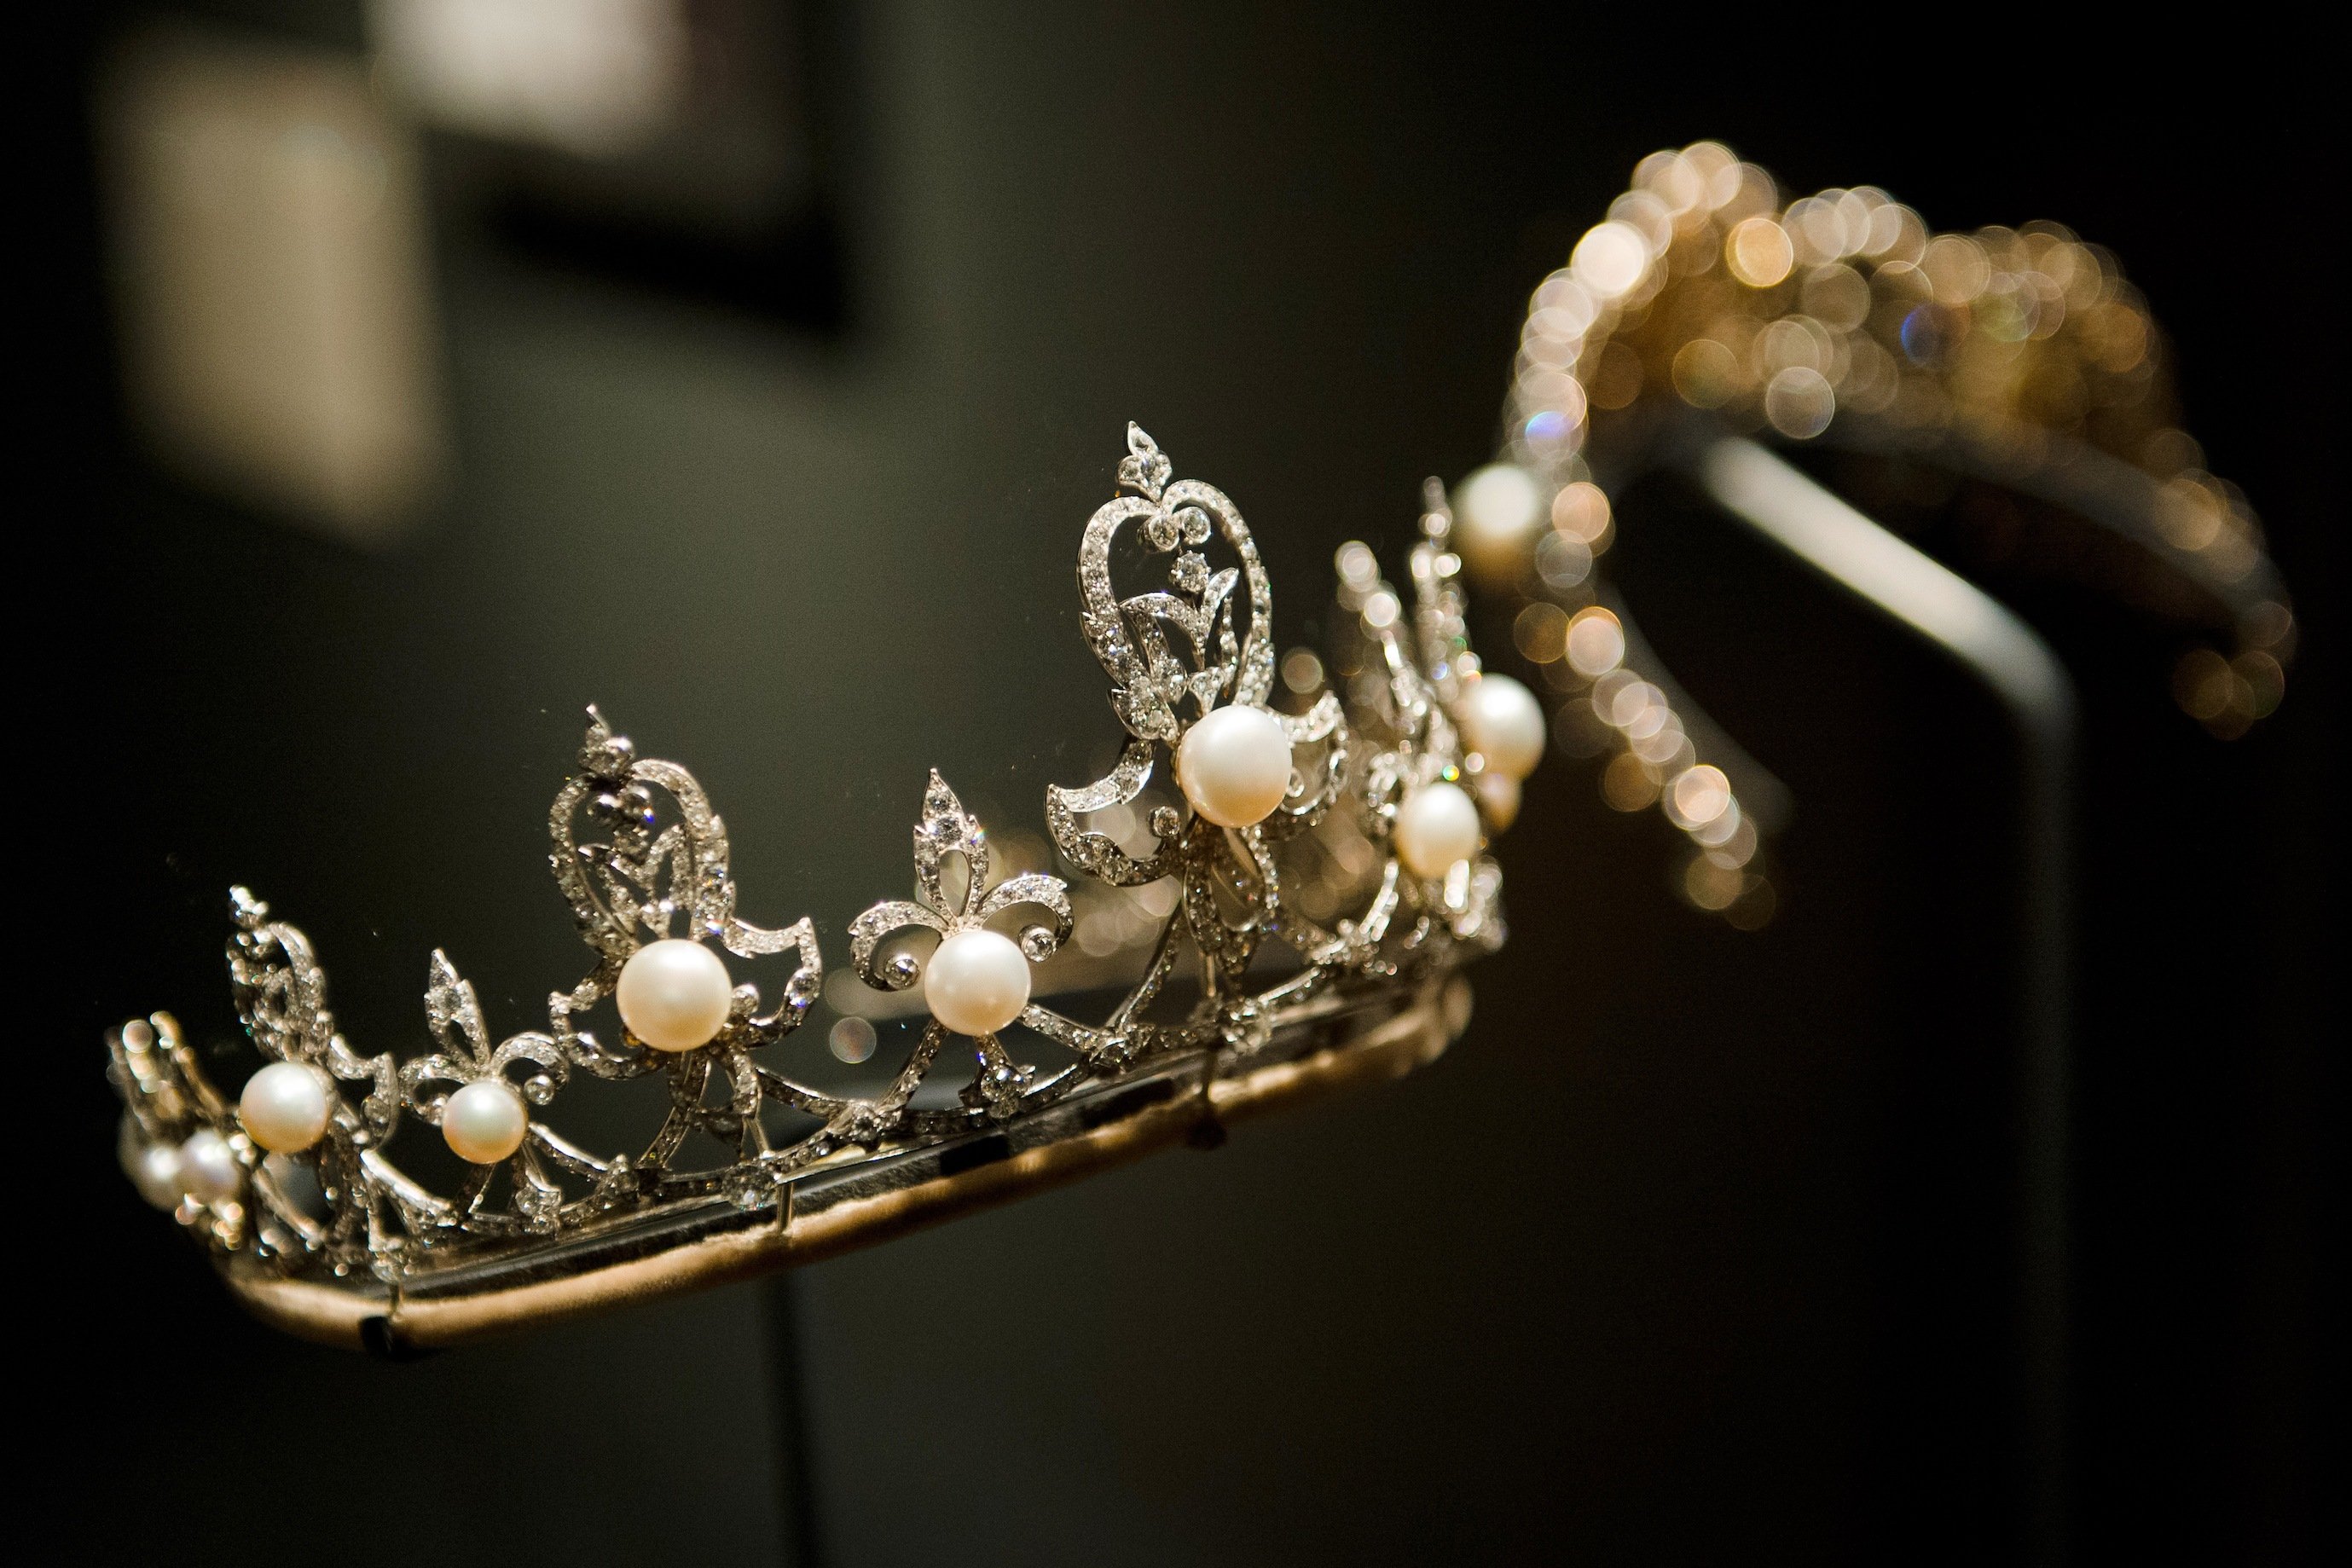 The Lady Raine Spencer tiara, owned by stepmother to the late Diana, Princess of Wales